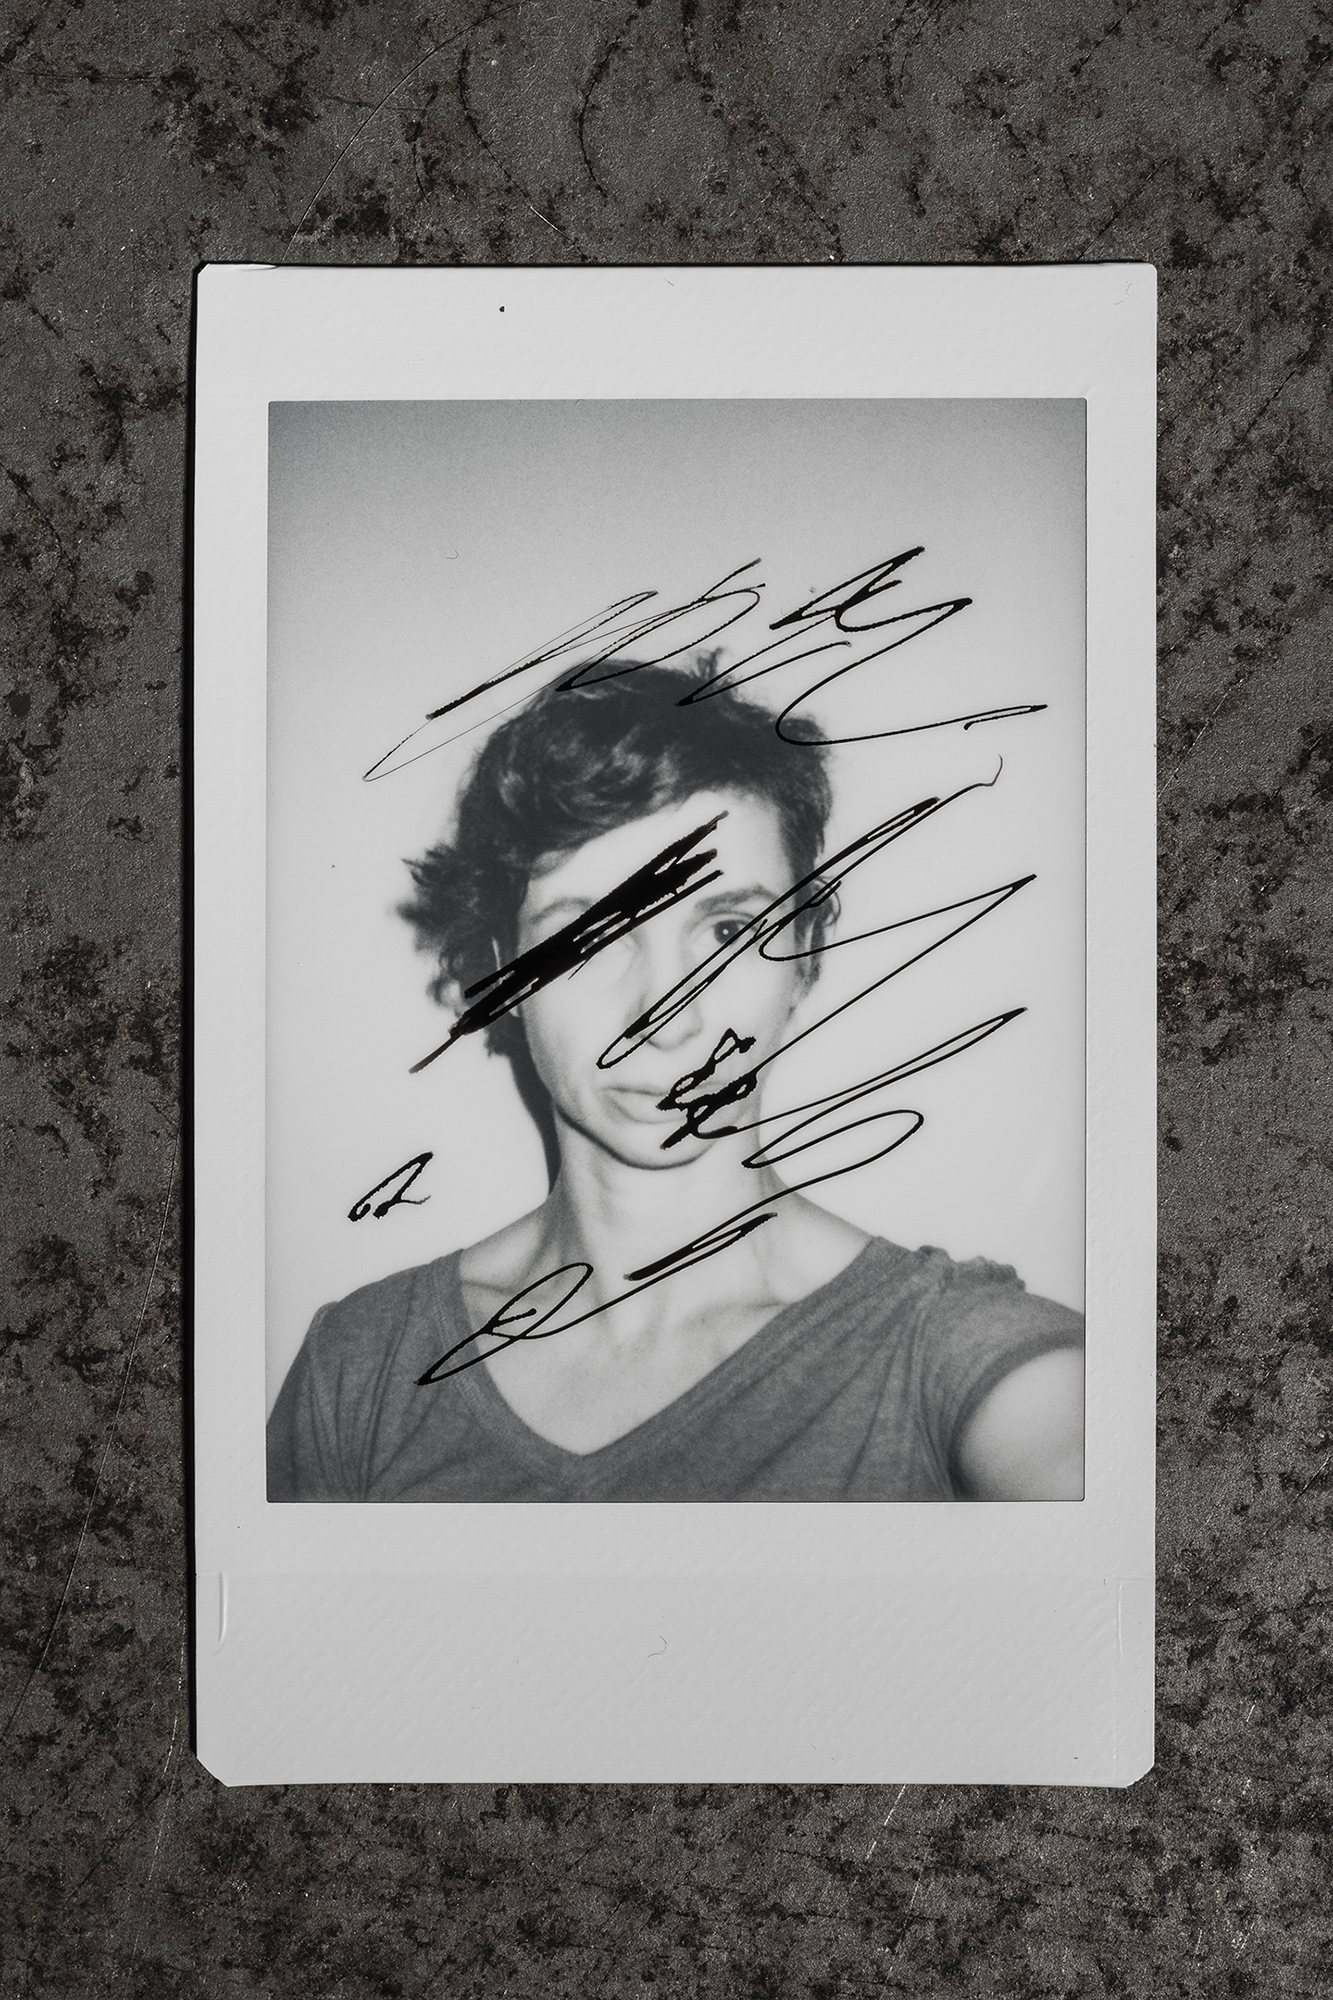 A polaroid of Sonya Stefan with artistic scribbles over her face and around her head